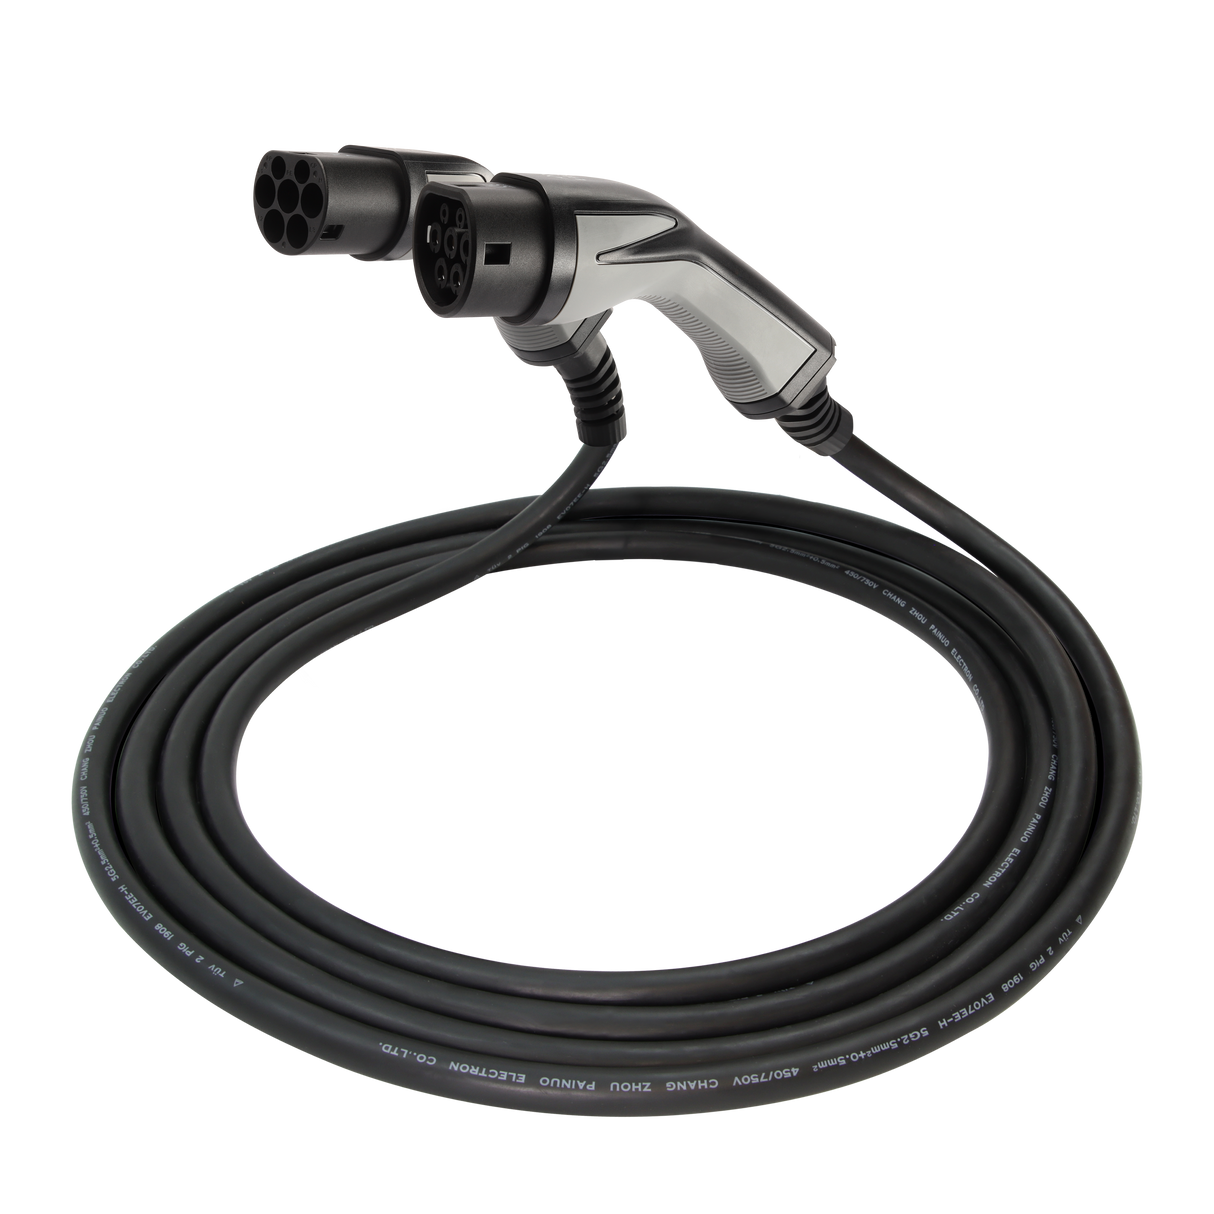 Charging cable Peugeot E -308 - Erock Pro Type 2 - 16A 3 phase (11 kW)